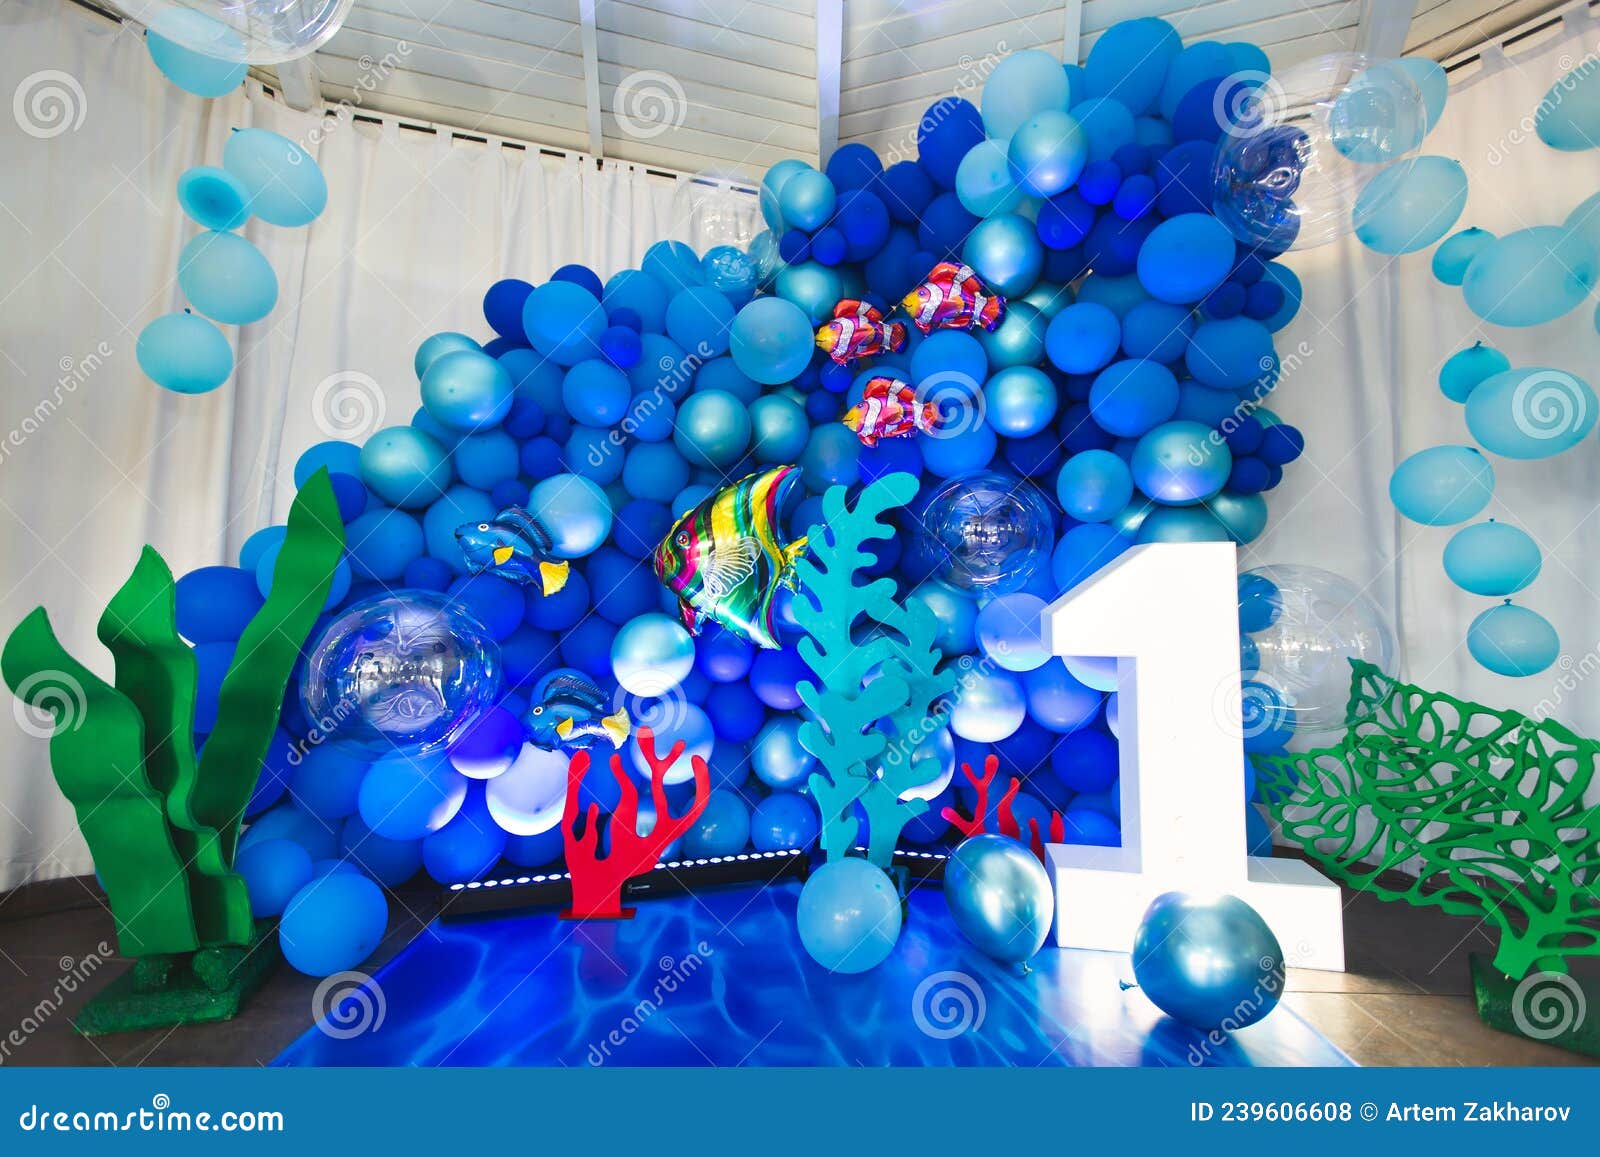 Marine-style Decor of Balloons, Fish, and Corals for the Birthday Photo  Zone Stock Photo - Image of balloon, atmosphere: 239606608